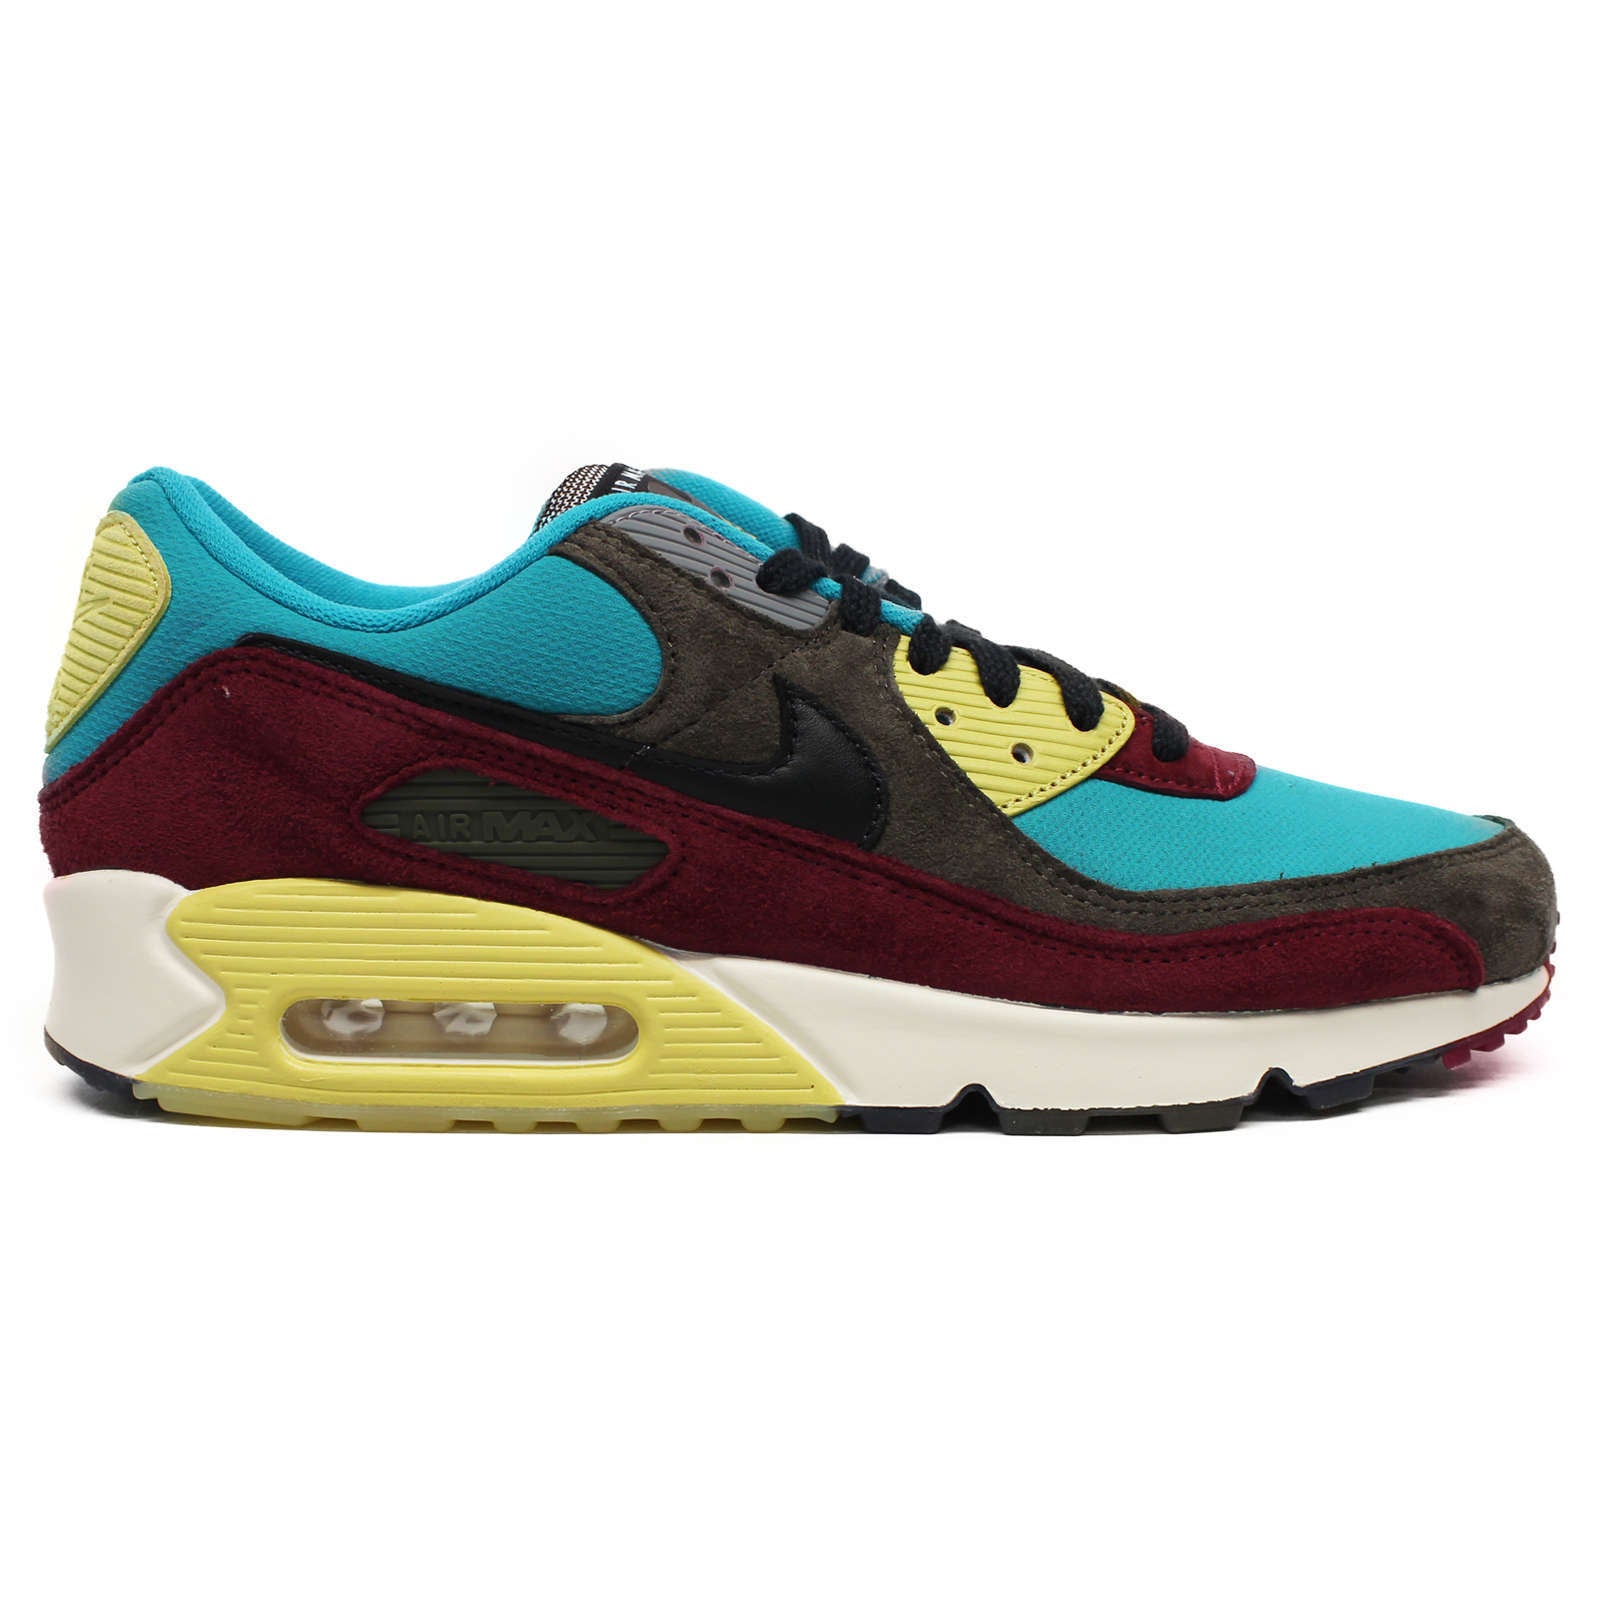 Air Max 90 NRG Suede Leather Unisex Low-Top Trainers